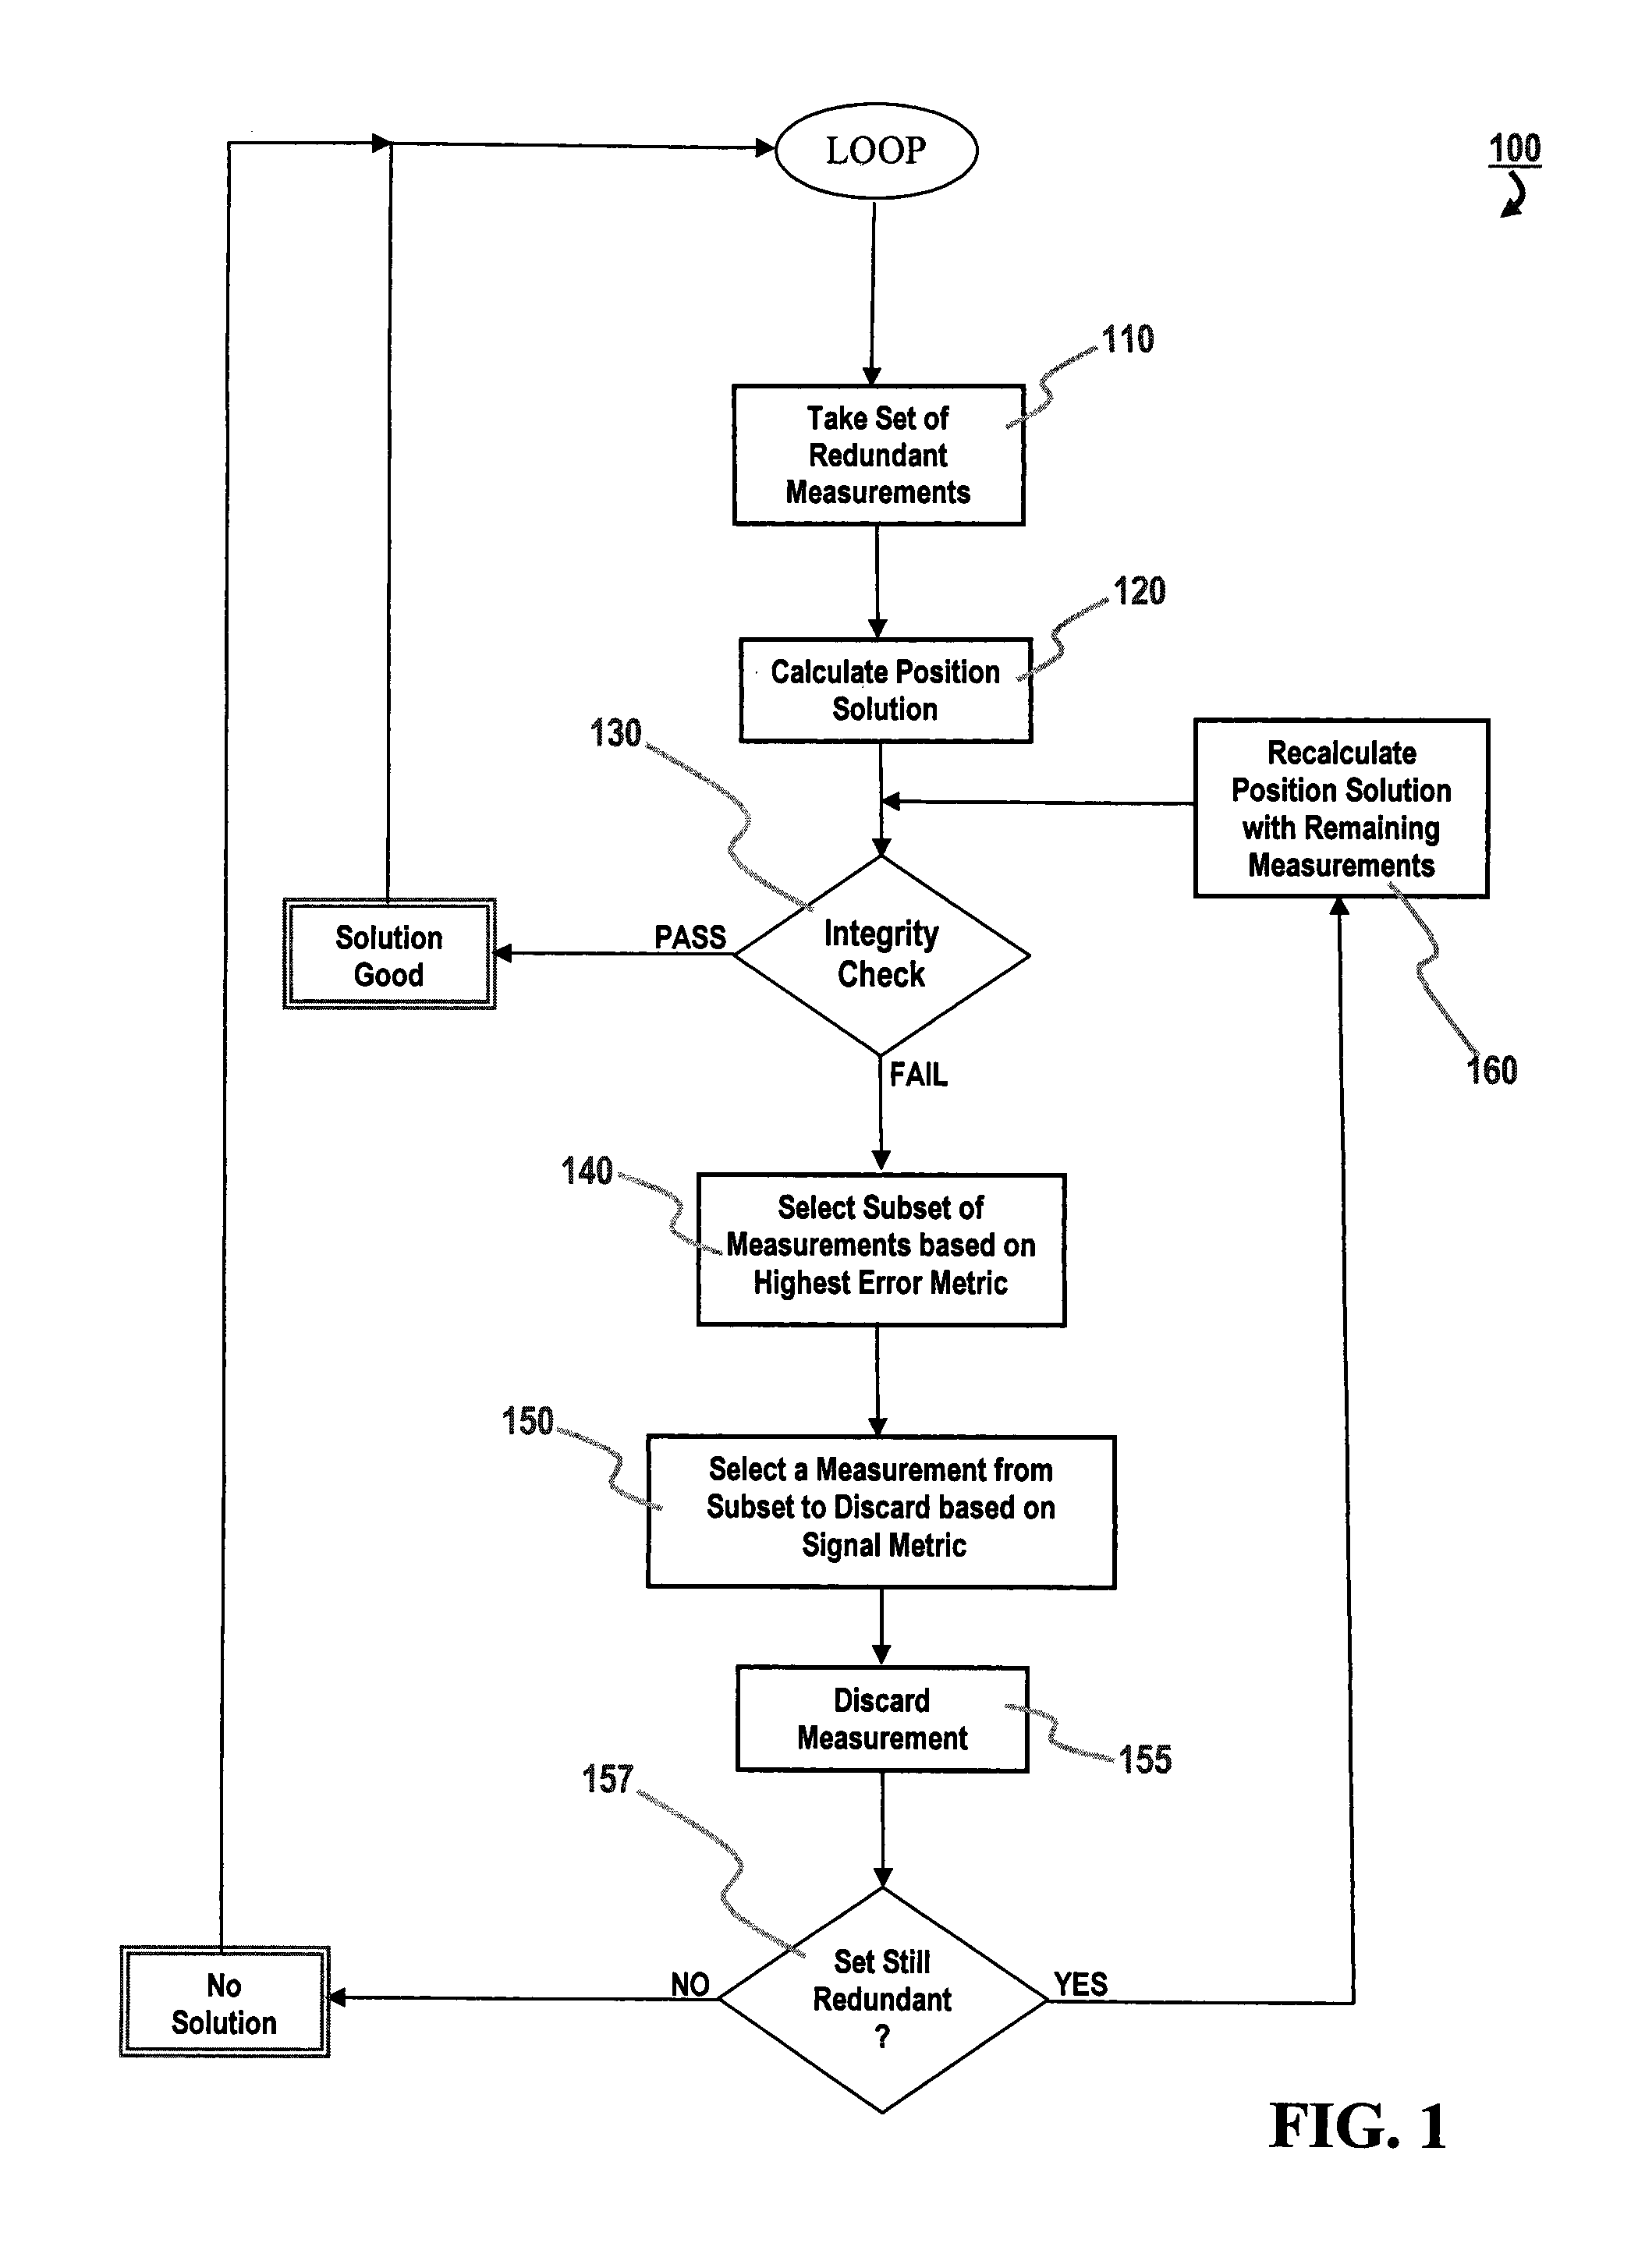 Method of multiple satellite measurement failure detection and isolation for GNSS